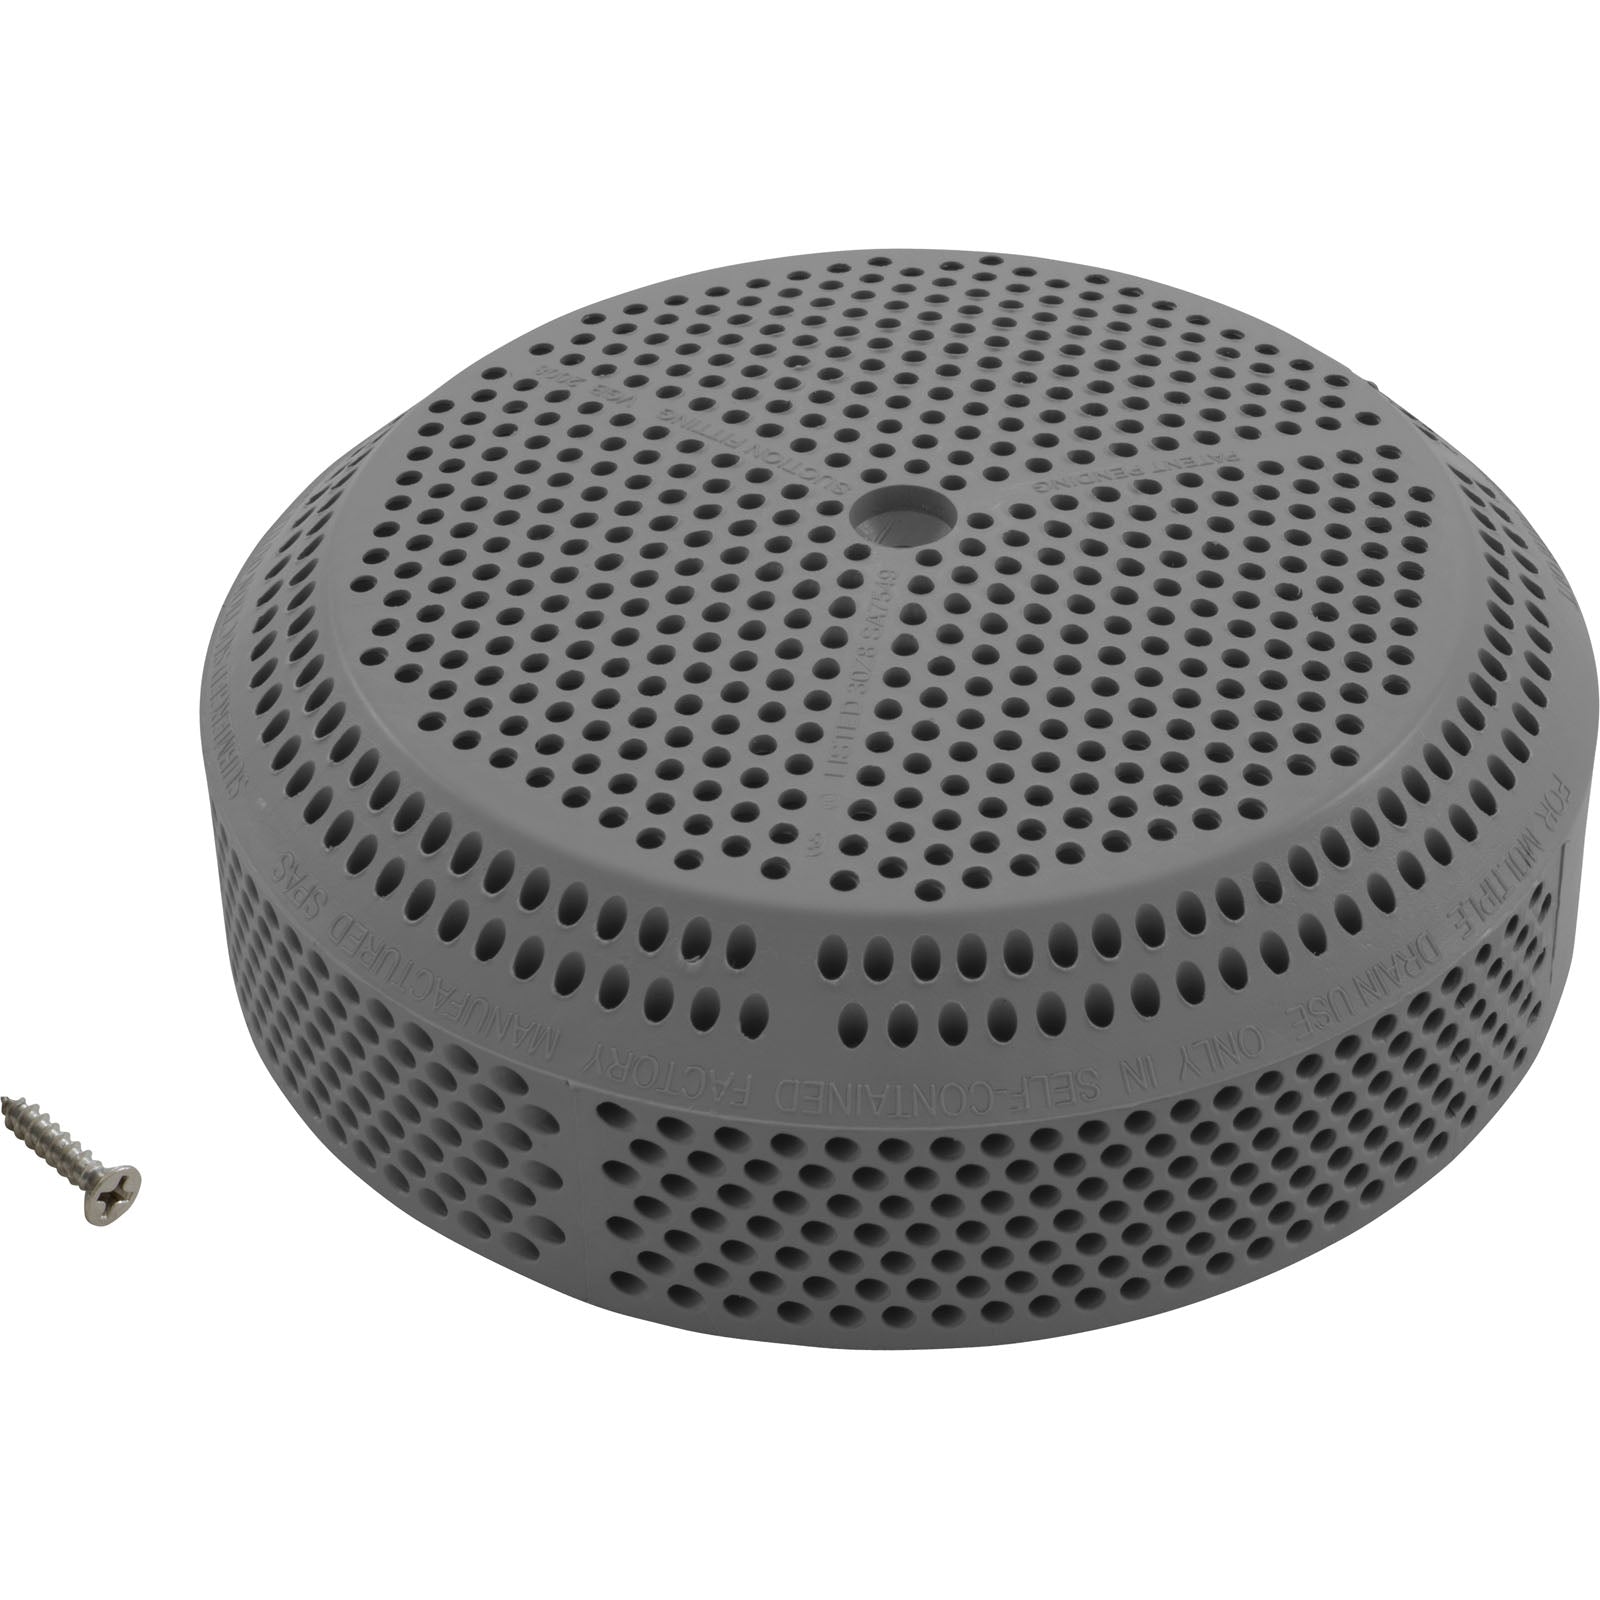 Max Flow II Replacement Suction Cover 211 gpm [Grey (900175) [81Z2] [30240U]